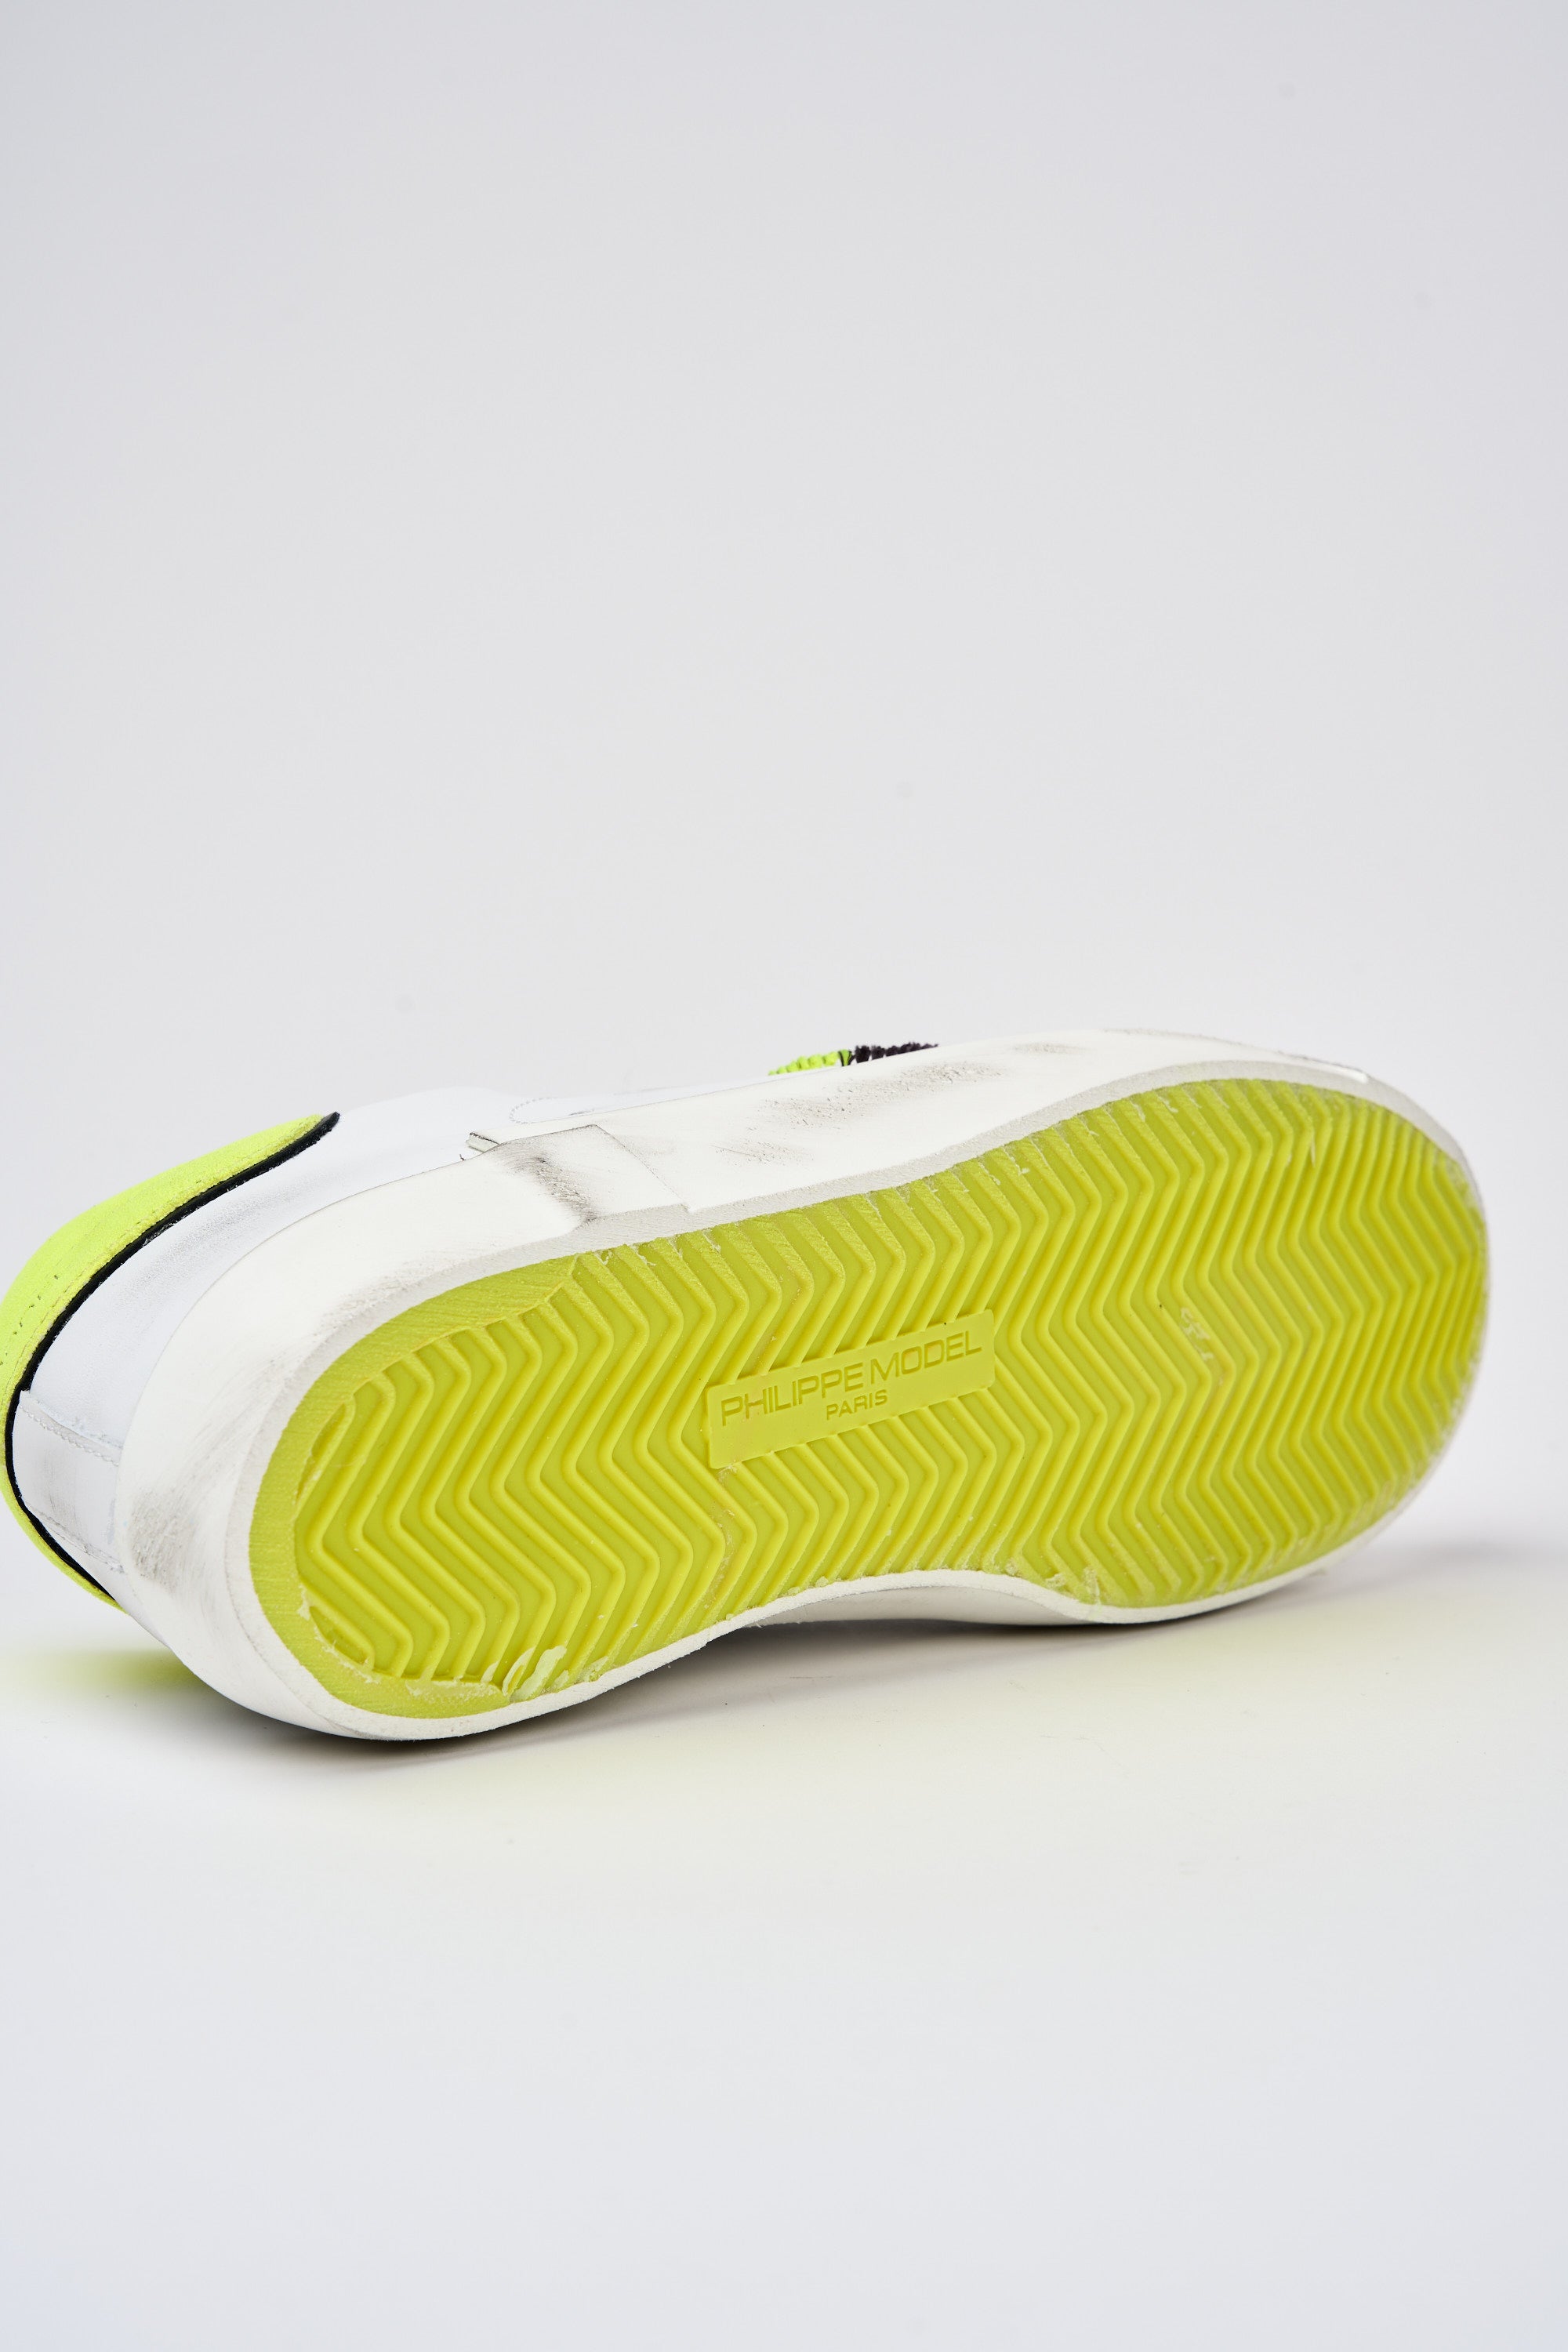 Philippe Model Sneaker Prsx Leather White/Yellow fluo-5